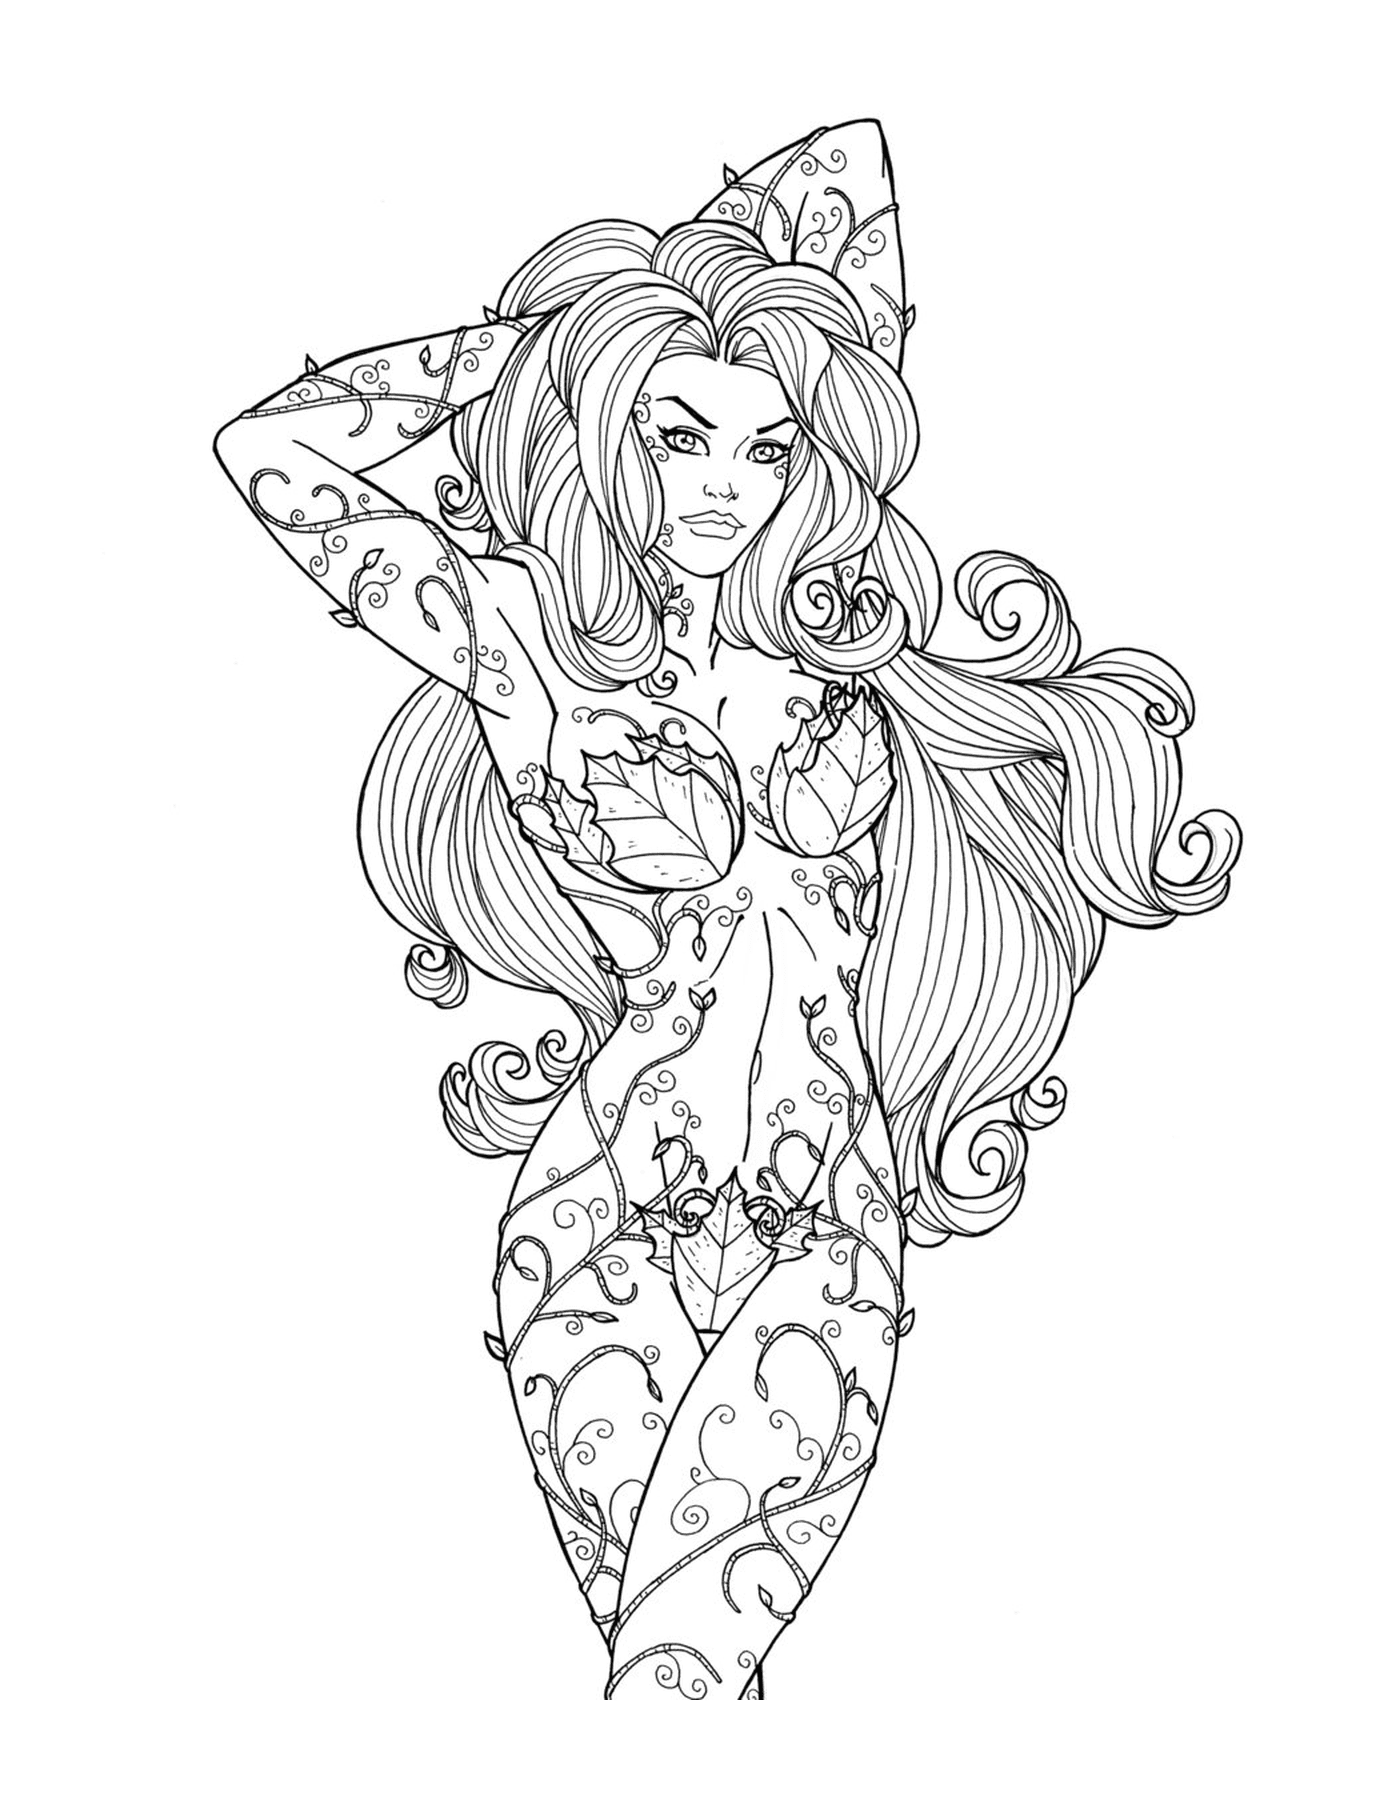  The girls of Batman Comics : Poison Ivy with long hair 